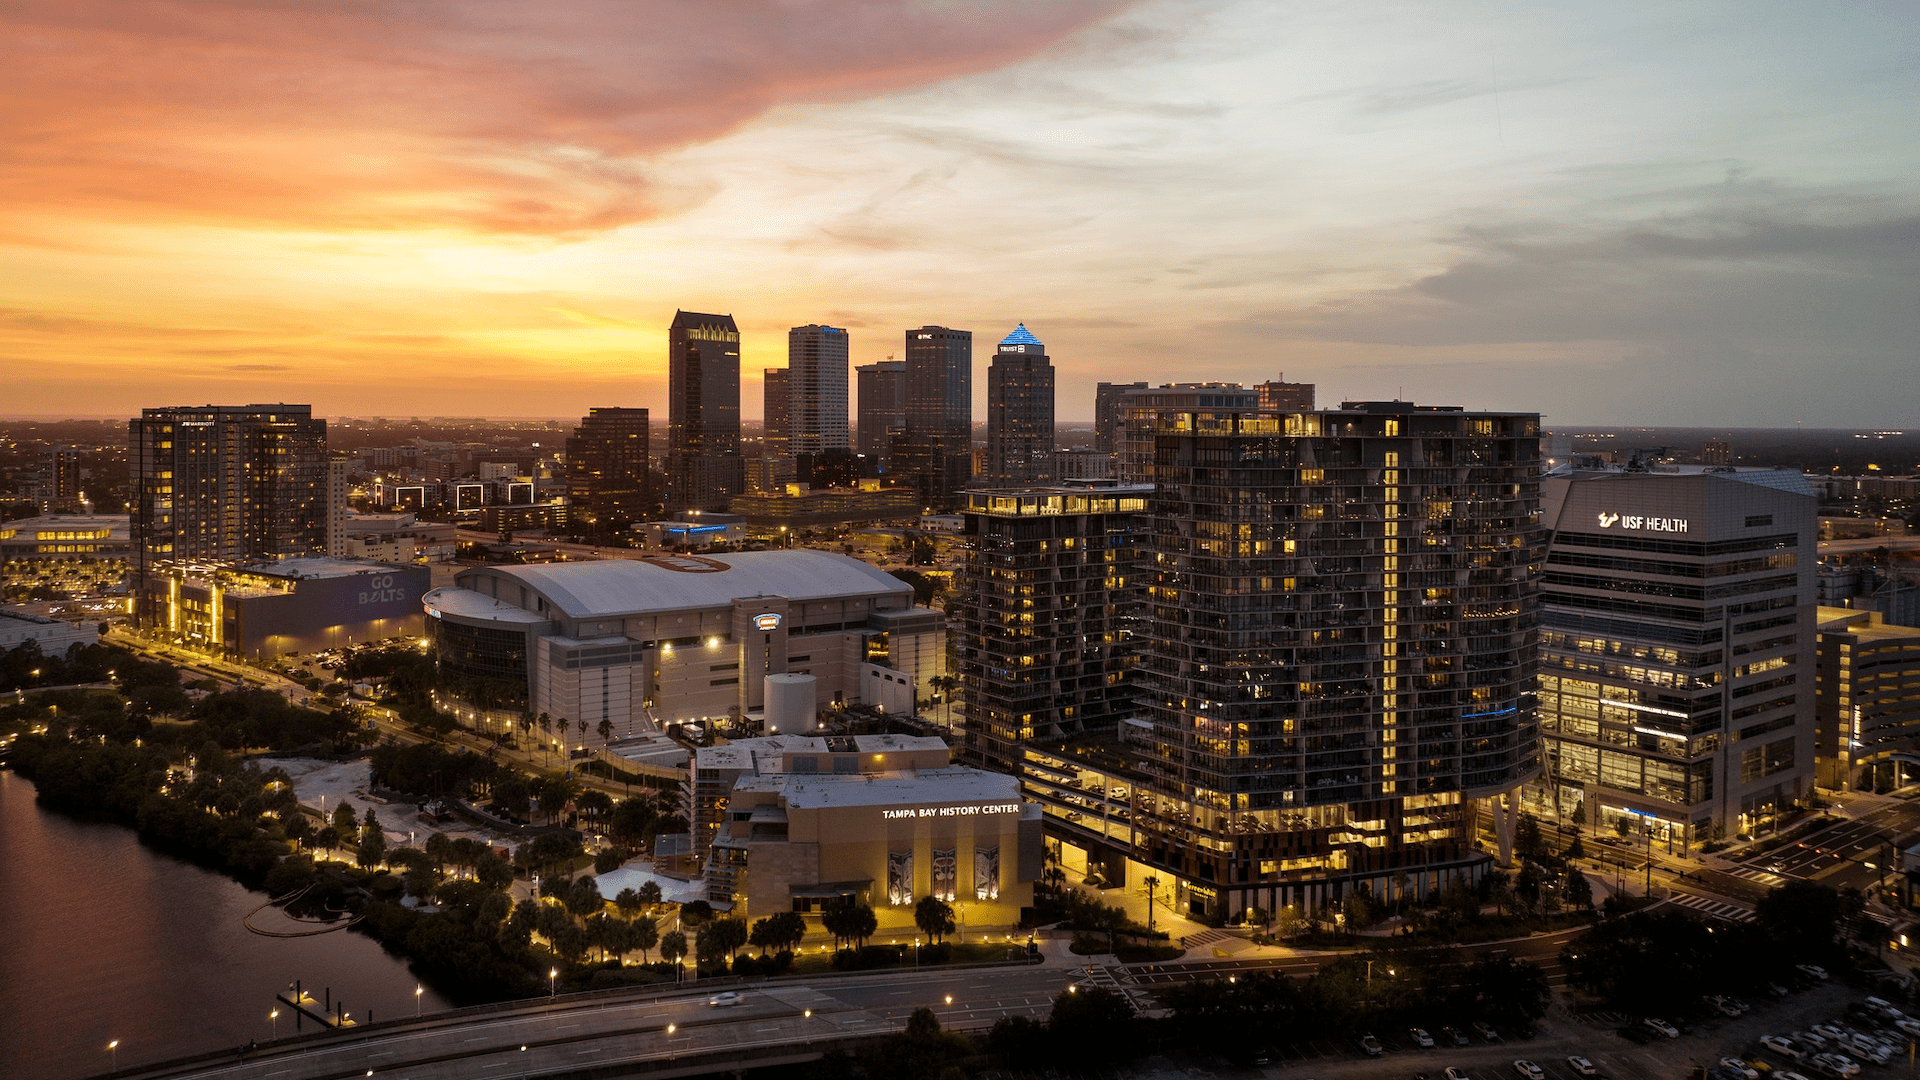 Aerial view of a major downtown area. Buildings are lit up on the waterfront.